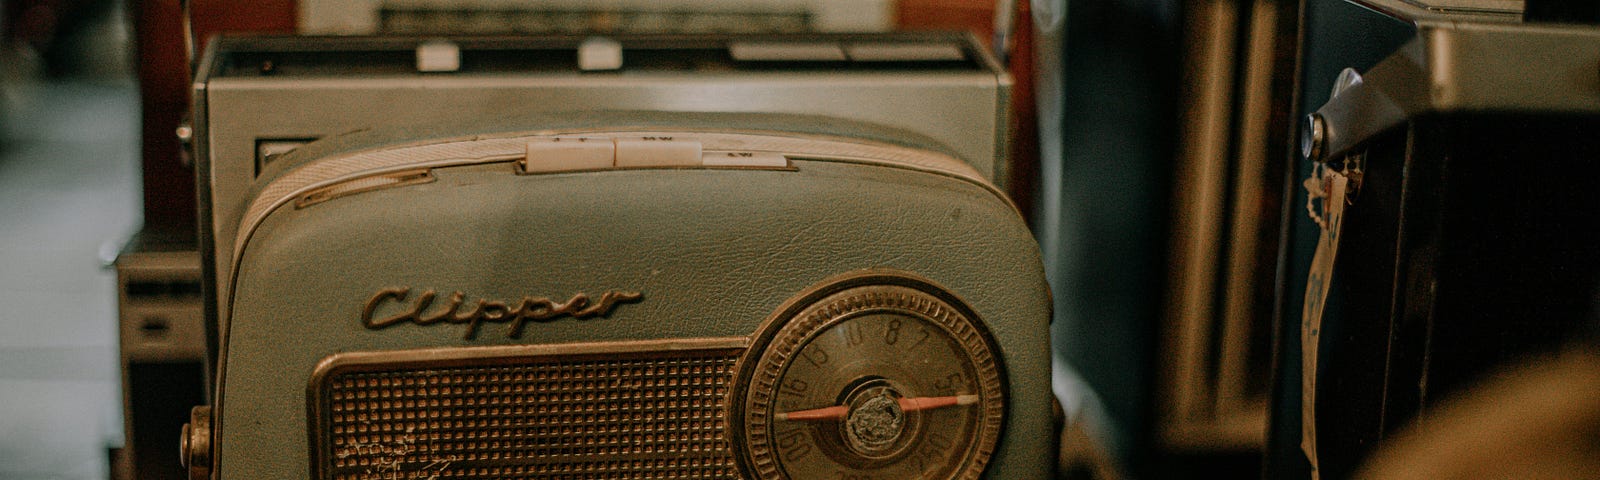 Old fashioned looking radio called a “Clipper.”